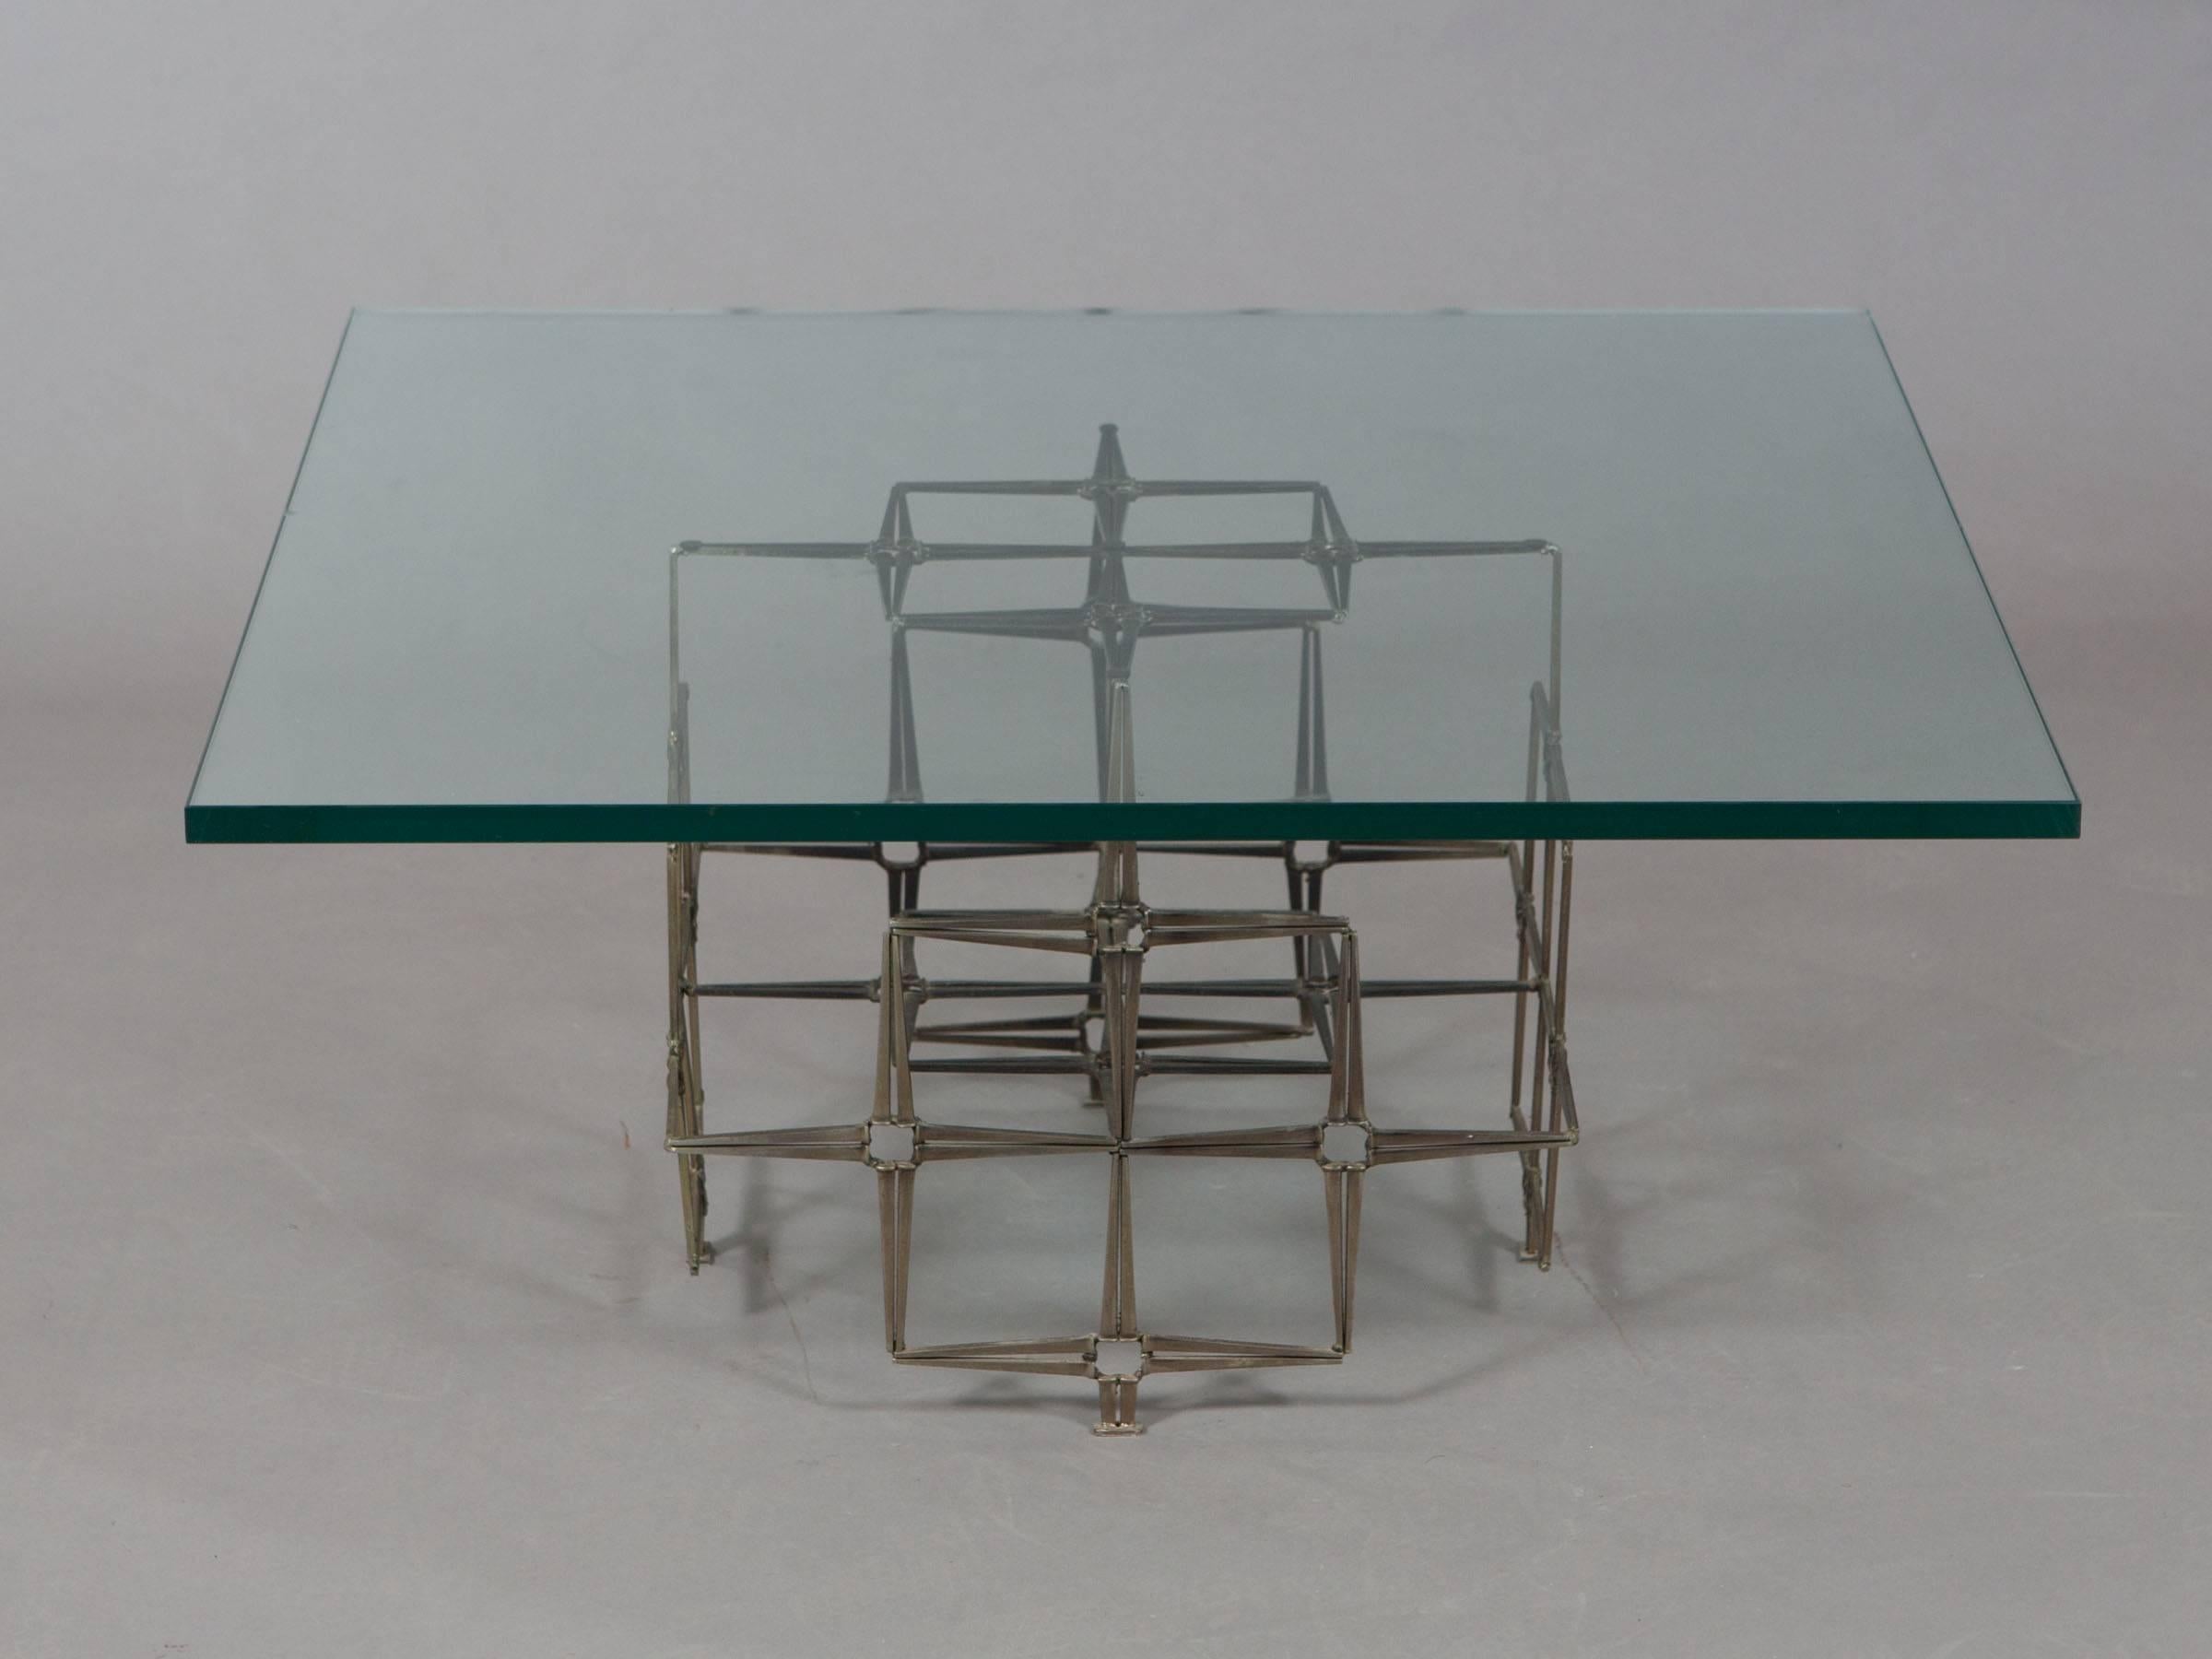 Handcrafted table constructed of welded steel masonry nails with a thick glass top in the style of Paul Evans. Geometrically sculpted base features a beautiful patina. Base measures 18.75